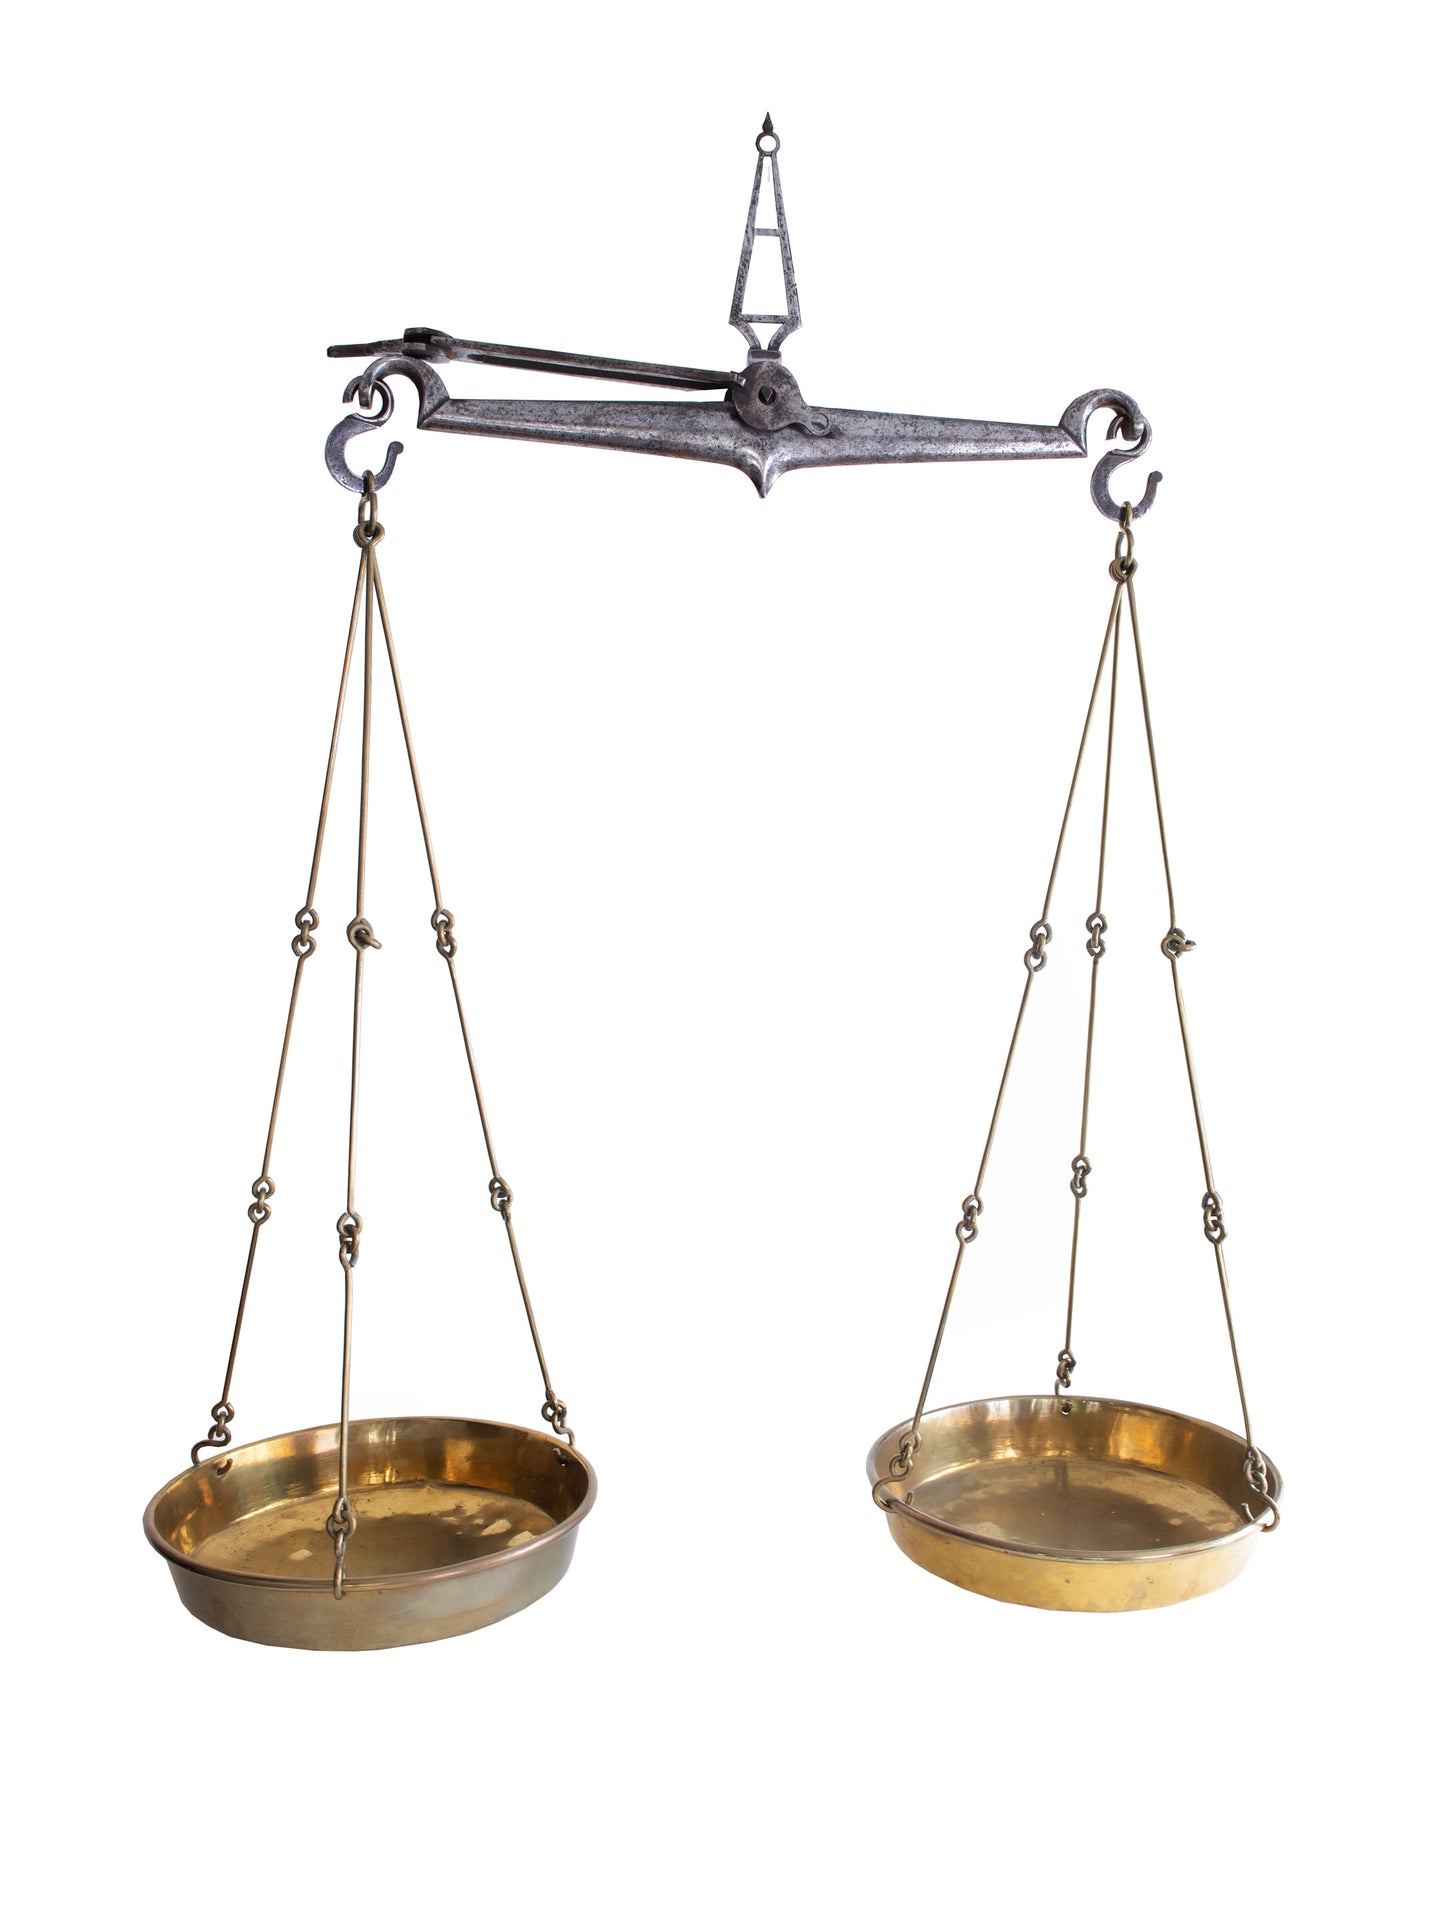 https://westontable.com/cdn/shop/products/1920s-French-Hanging-Balance-Scales-Weston-Table-SP.jpg?v=1620225058&width=1445